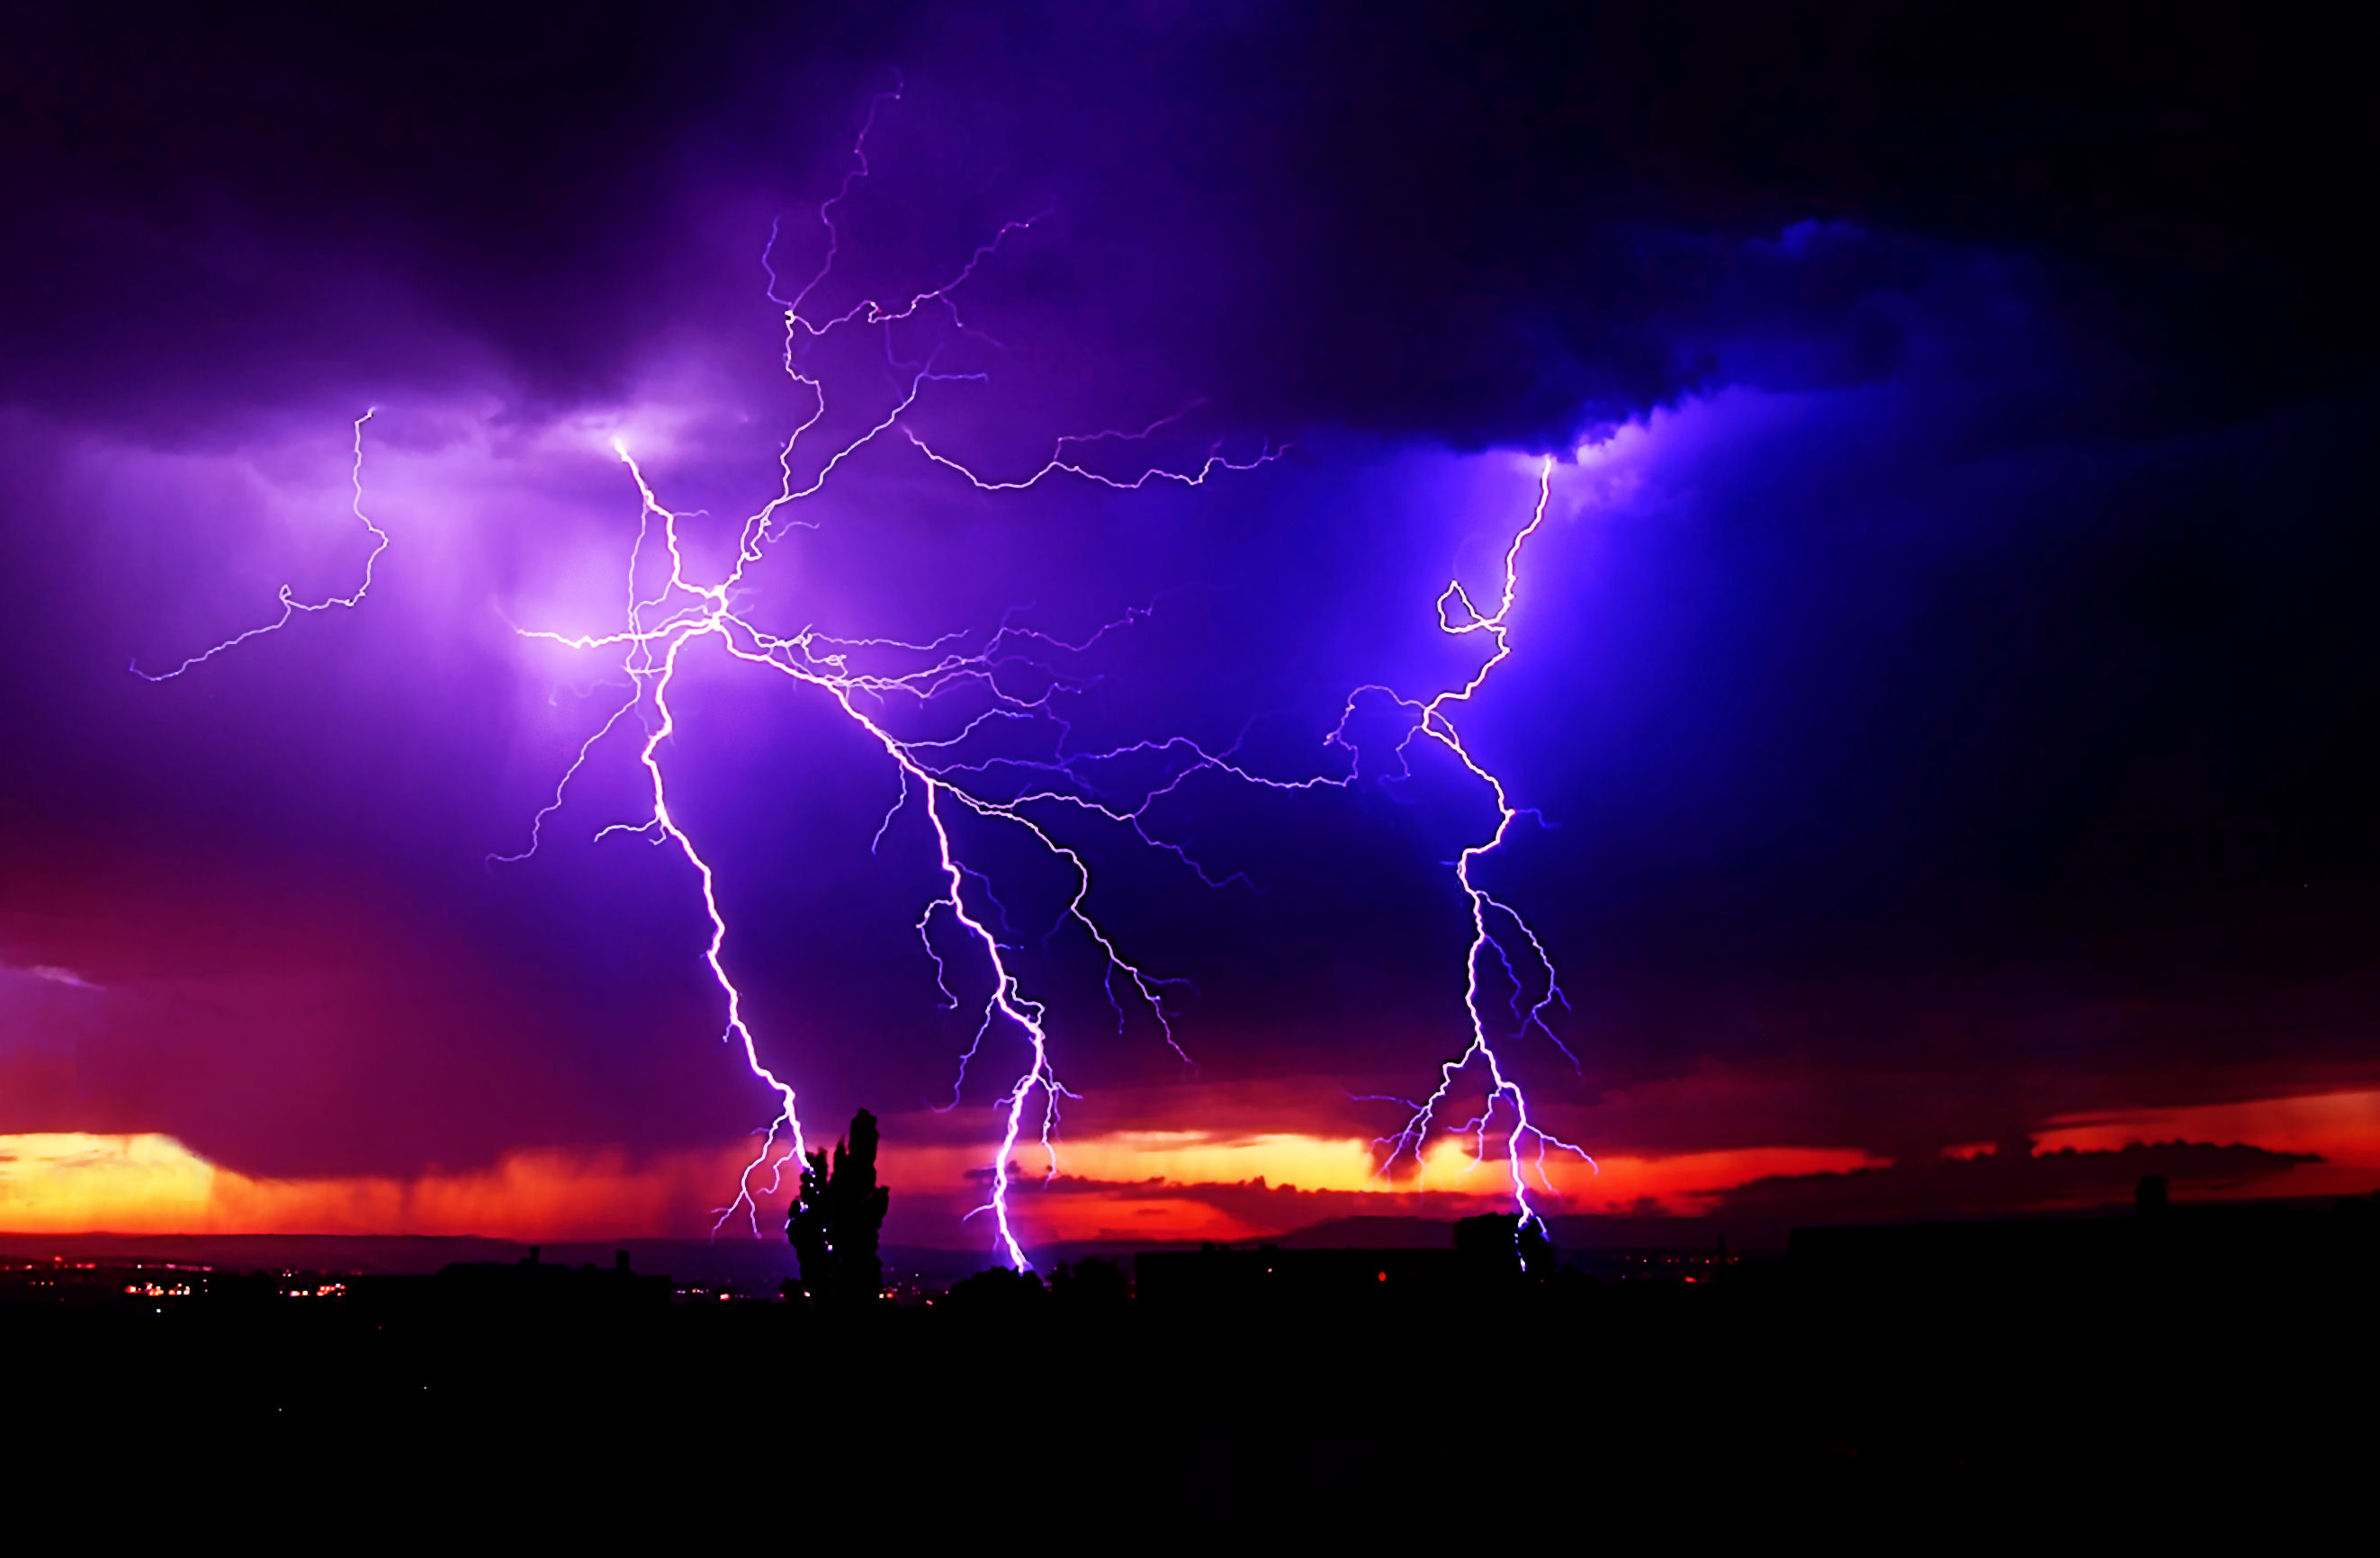 Lightning Storms For Your Desktop Wallpaper Thomas Craig Consulting